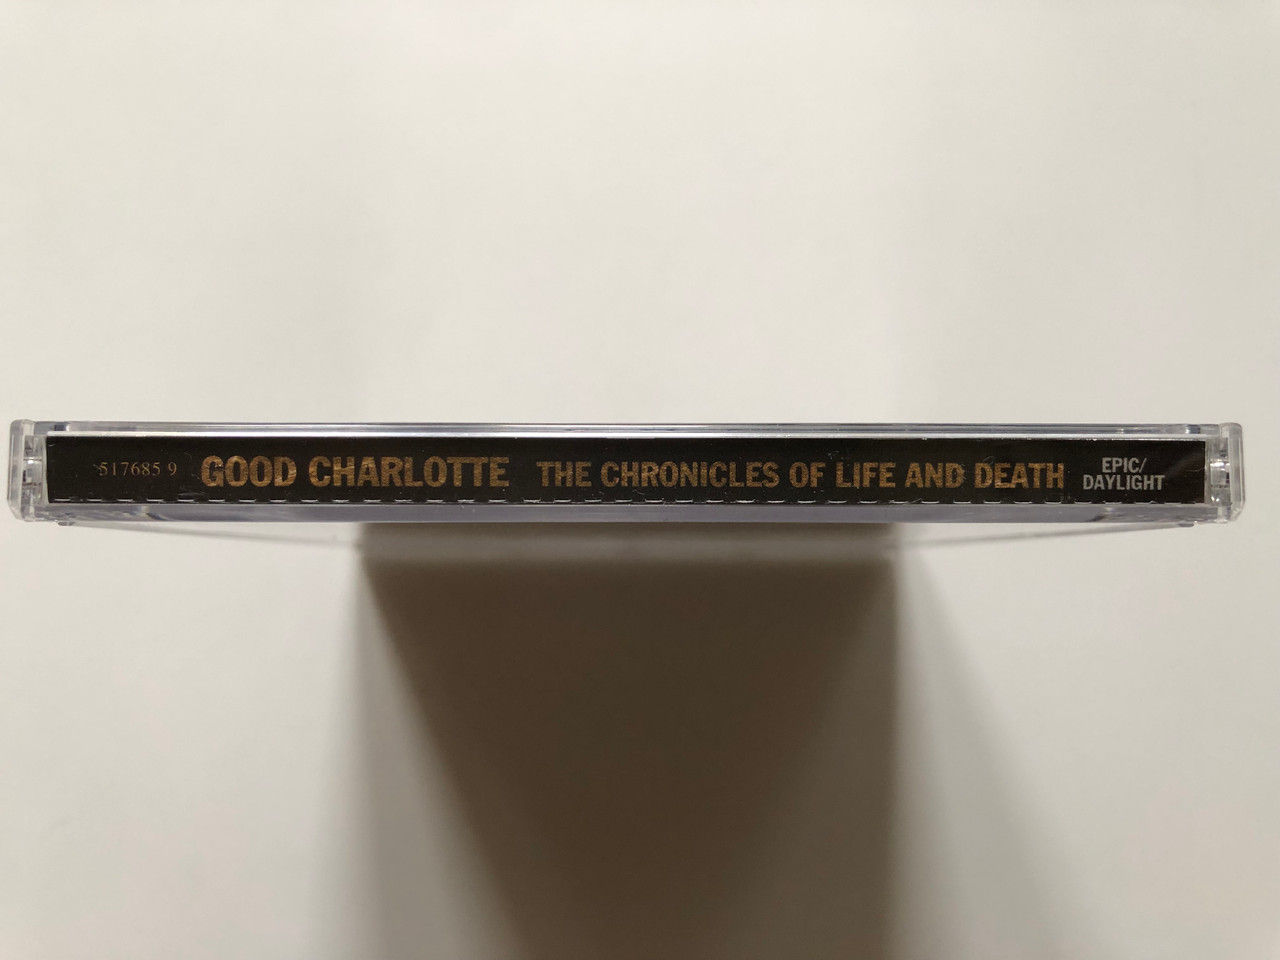 https://cdn10.bigcommerce.com/s-62bdpkt7pb/products/0/images/313417/Good_Charlotte_The_Chronicles_Of_Life_And_Death_Epic_Audio_CD_2004_517685_9_3__46064.1700758218.1280.1280.JPG?c=2